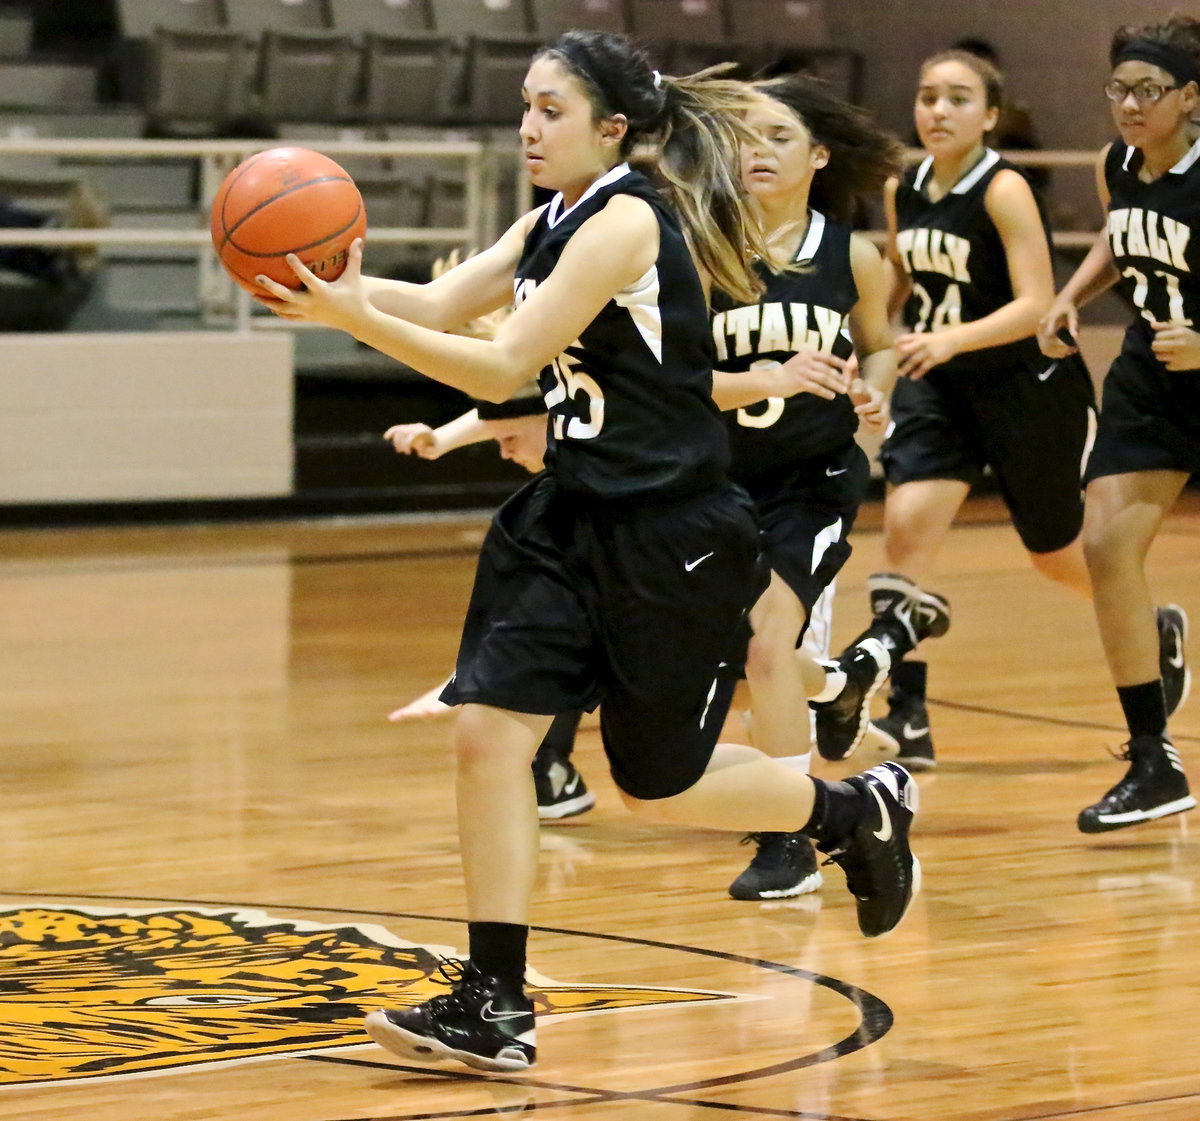 Image: Lizzy Garcia(25) catches a pass on her way to the basket.